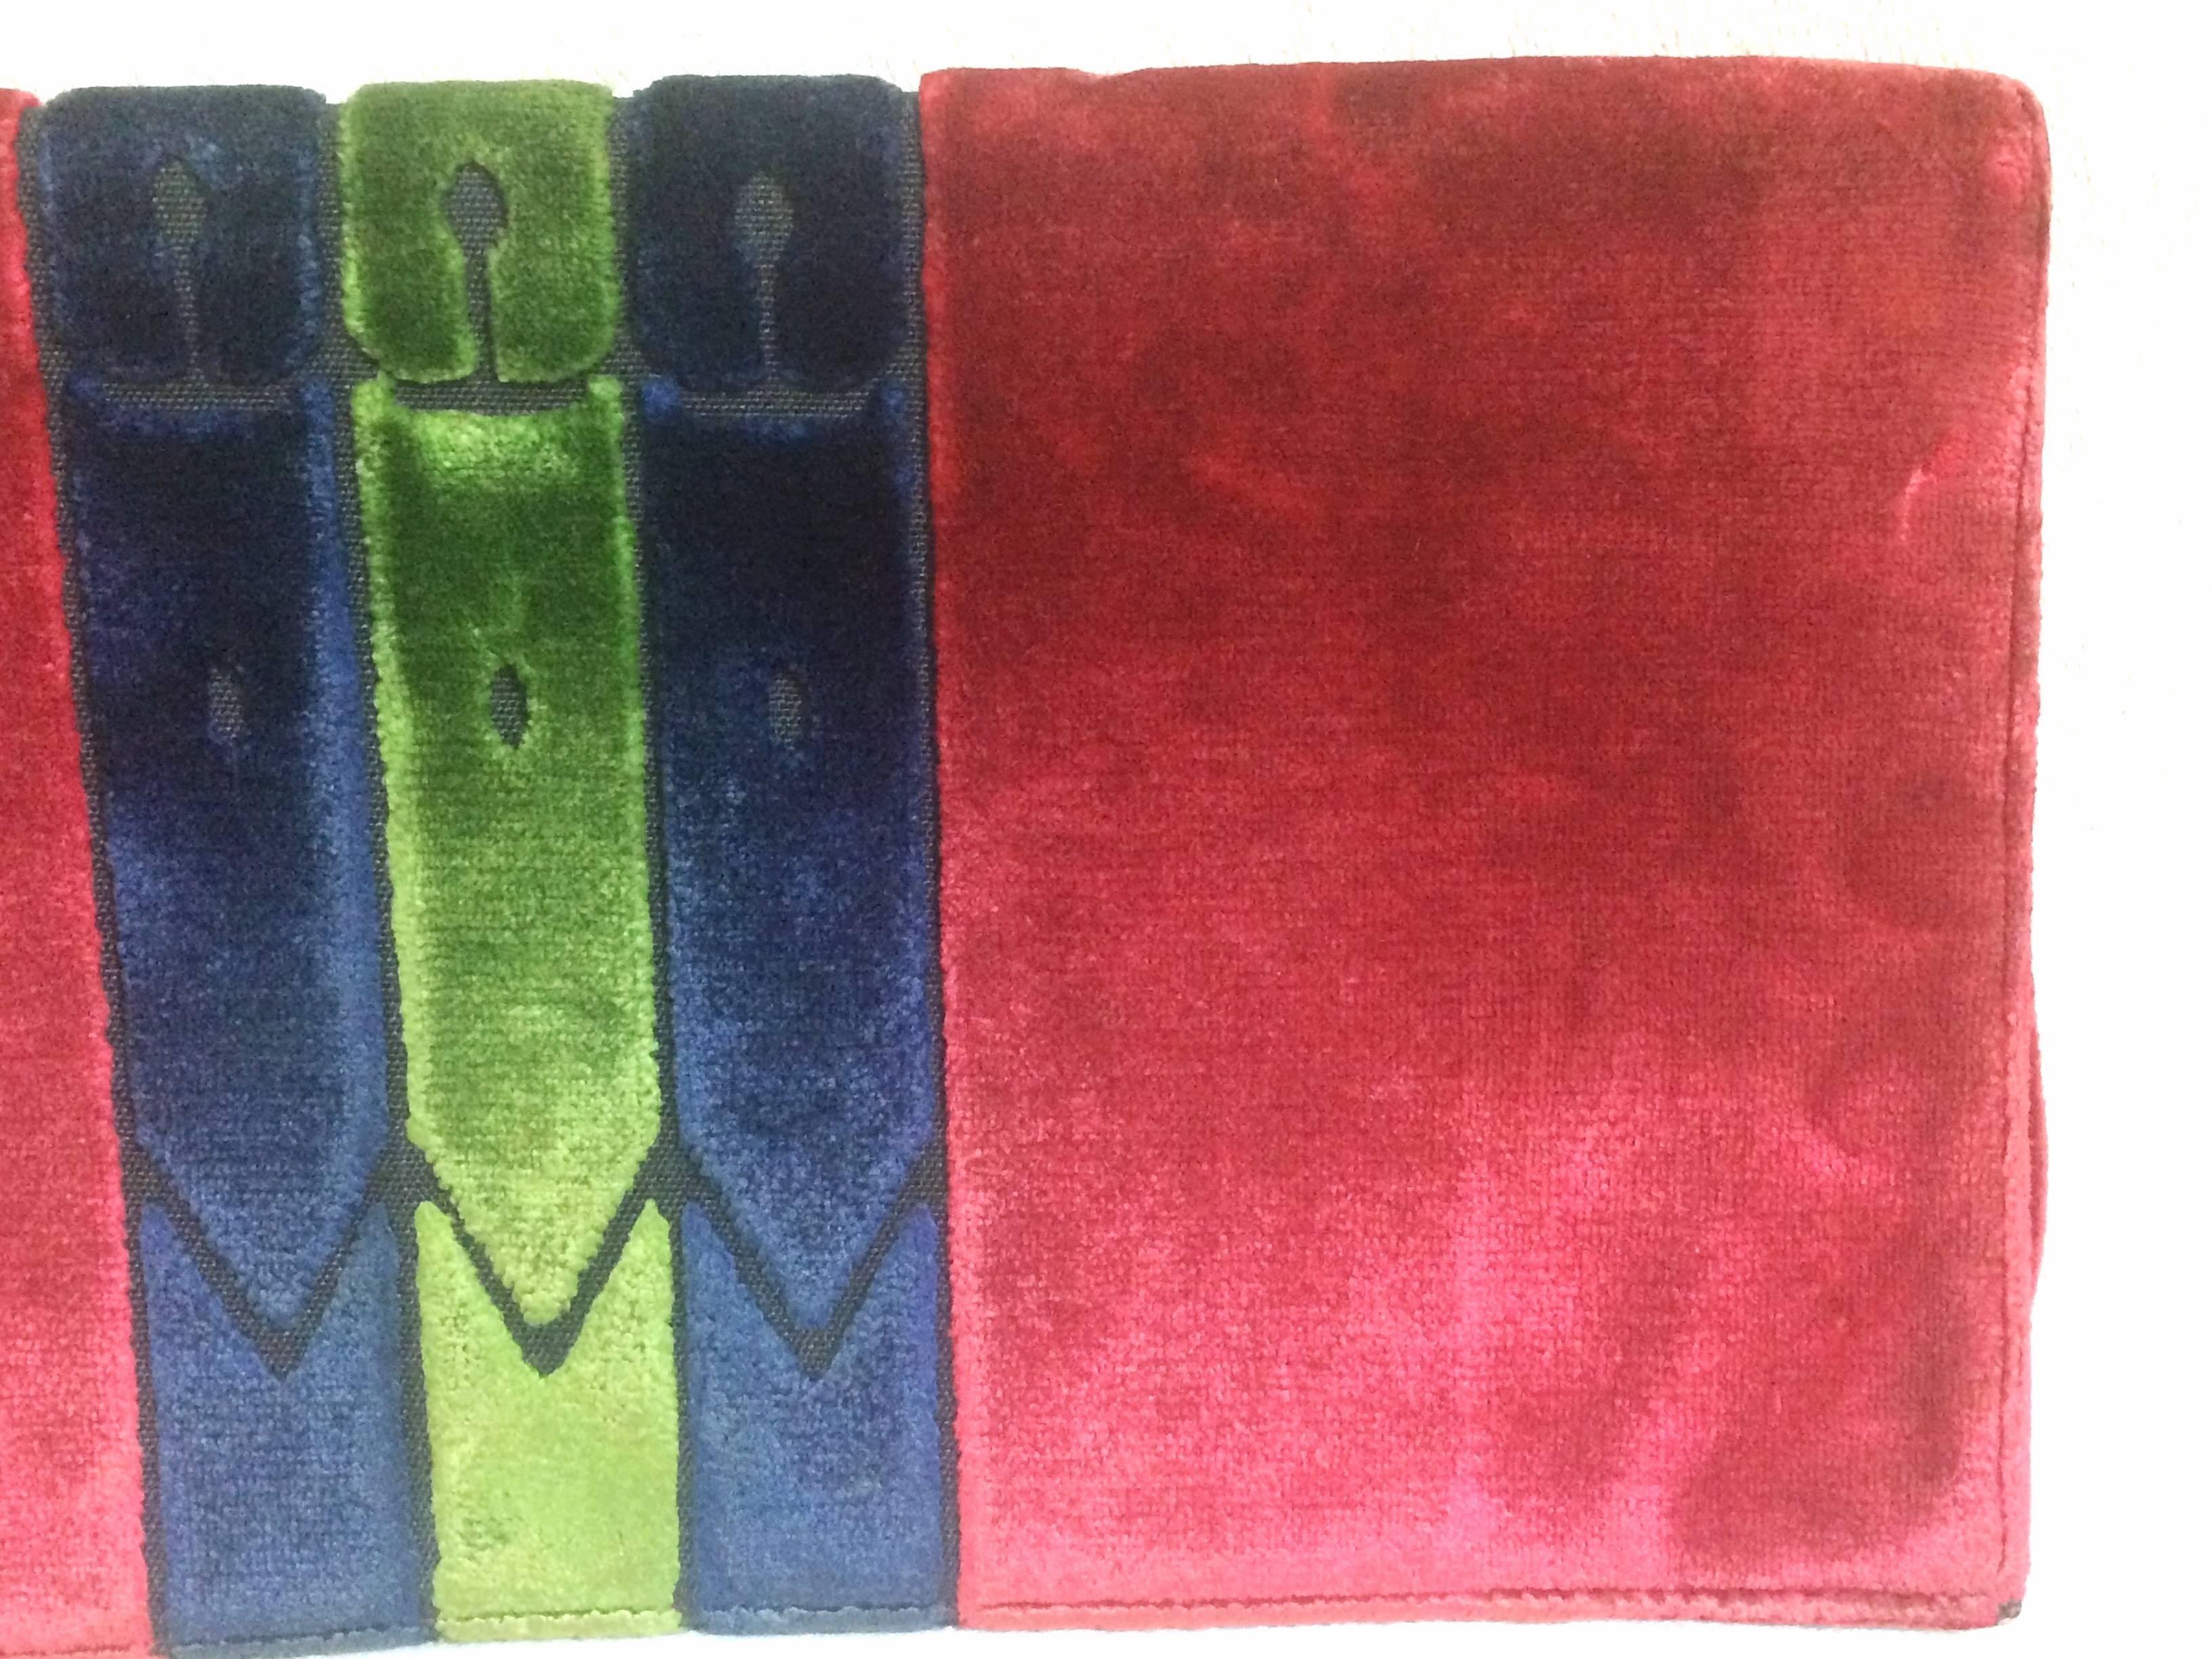 Pink 80's Vintage Roberta di Camerino velvet, chenille clutch in red, navy and green.